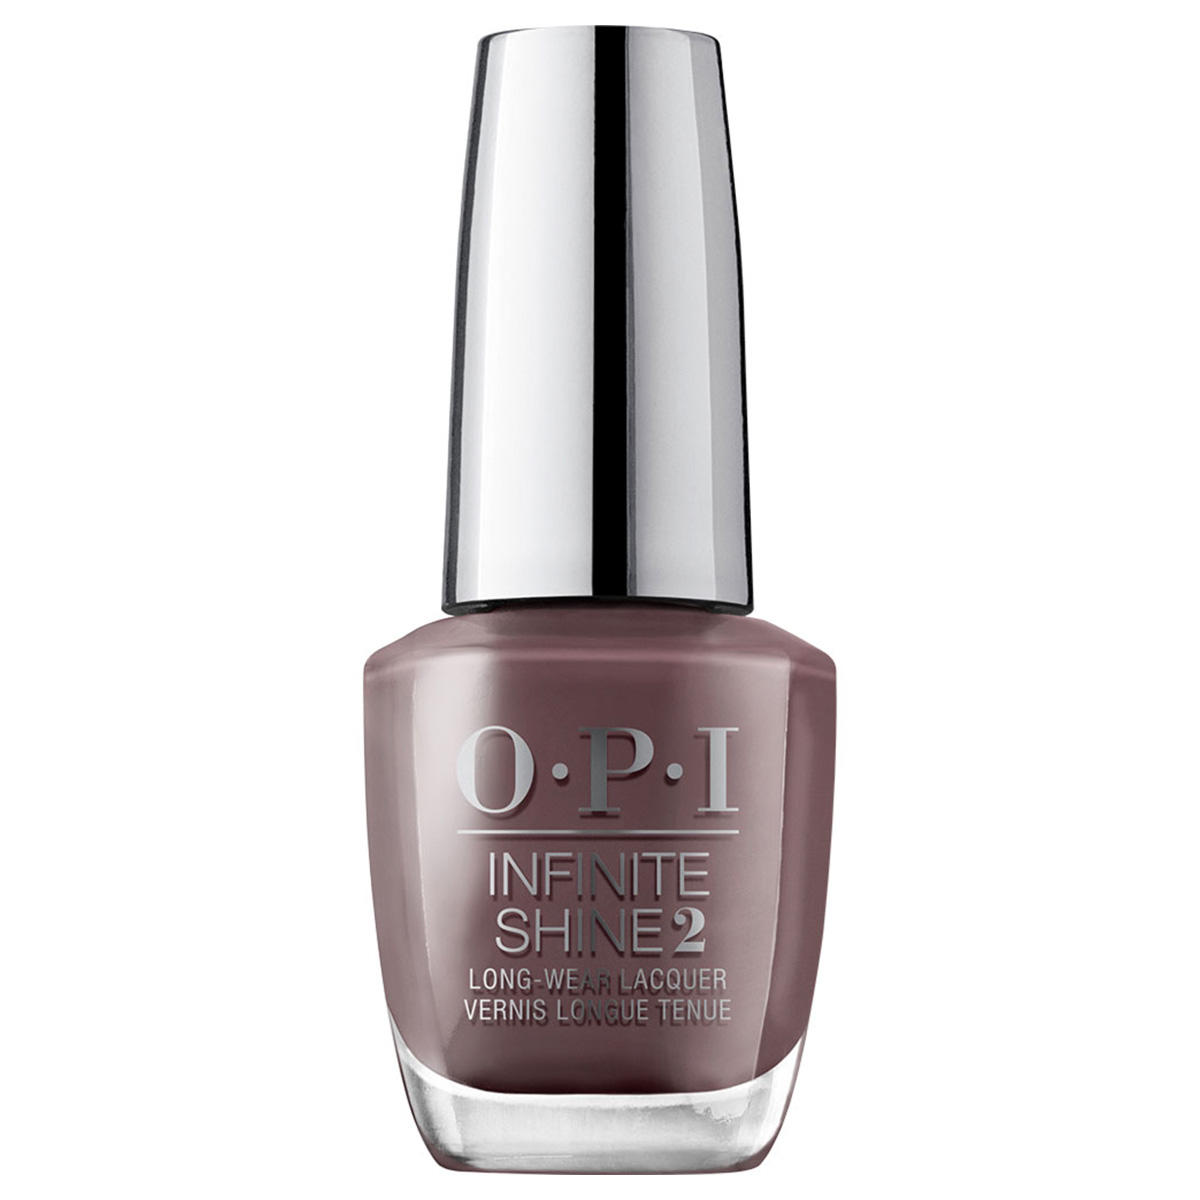 OPI Infinite Shine You Don't Know Jacques! 15 ml - 1